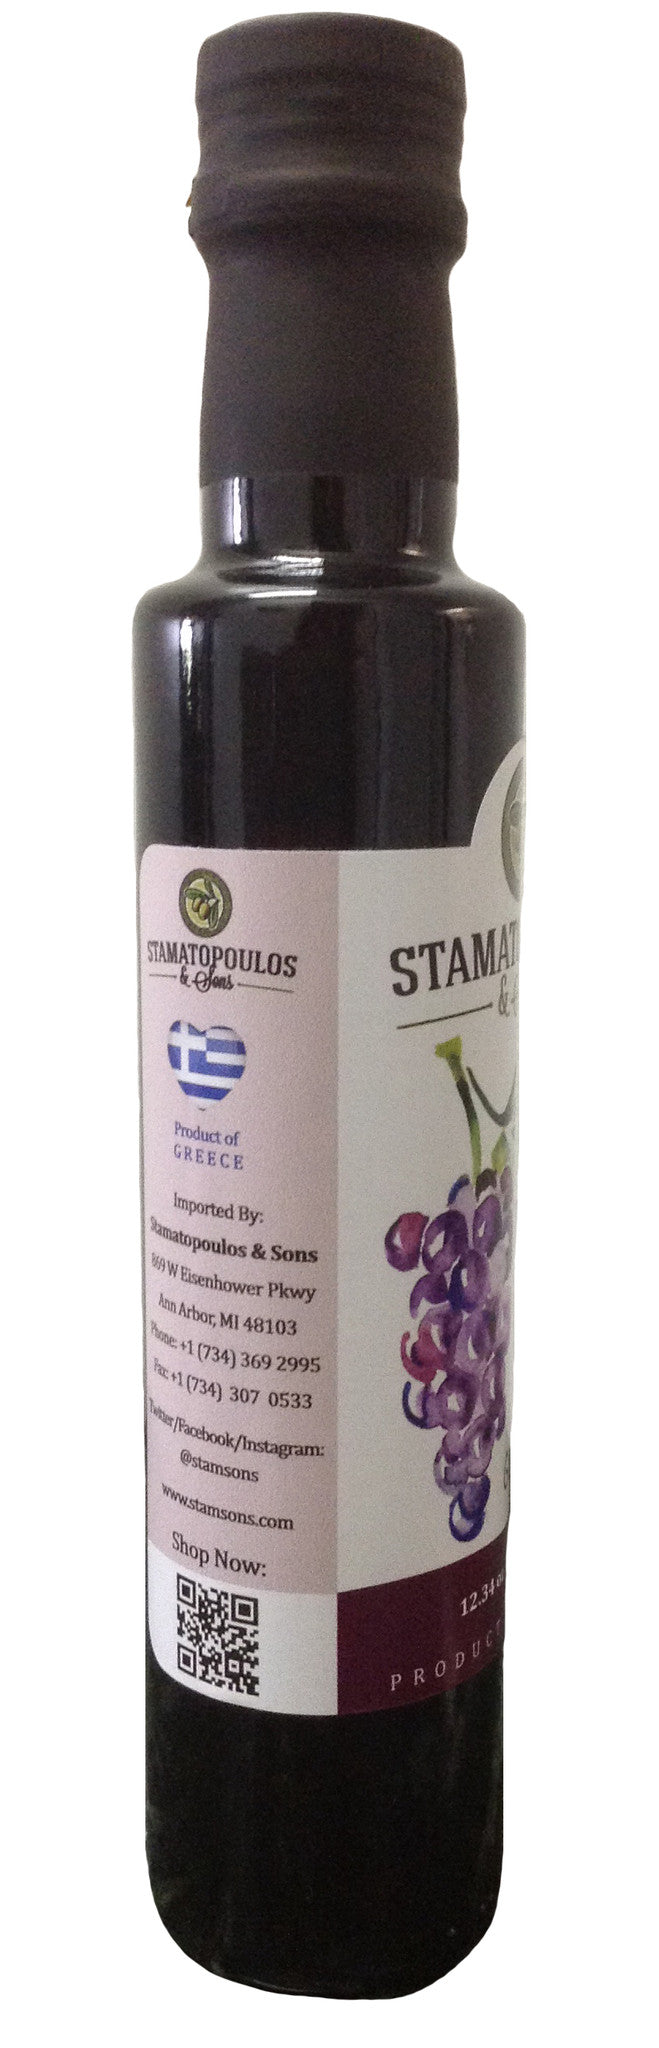 Petimezi - Concentrated Grape Syrup - 350g